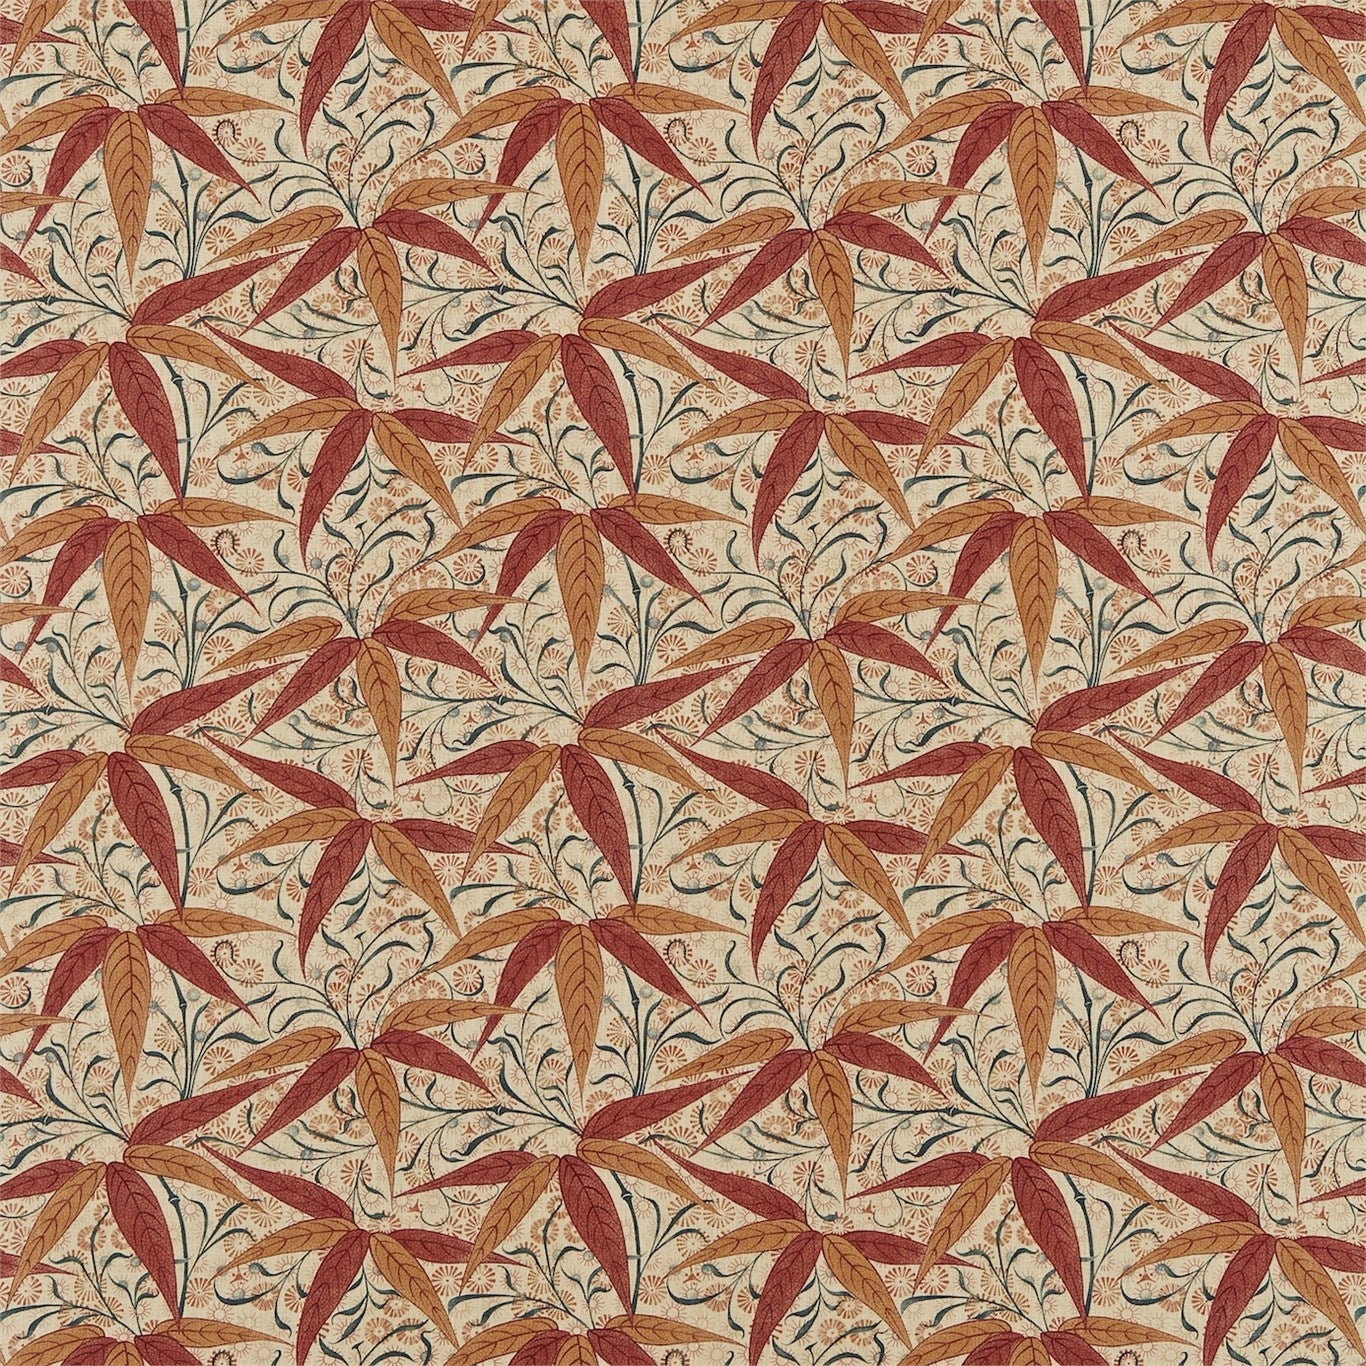 Bamboo Fabric by Morris & Co. - DARP222527 - Russet/Siena